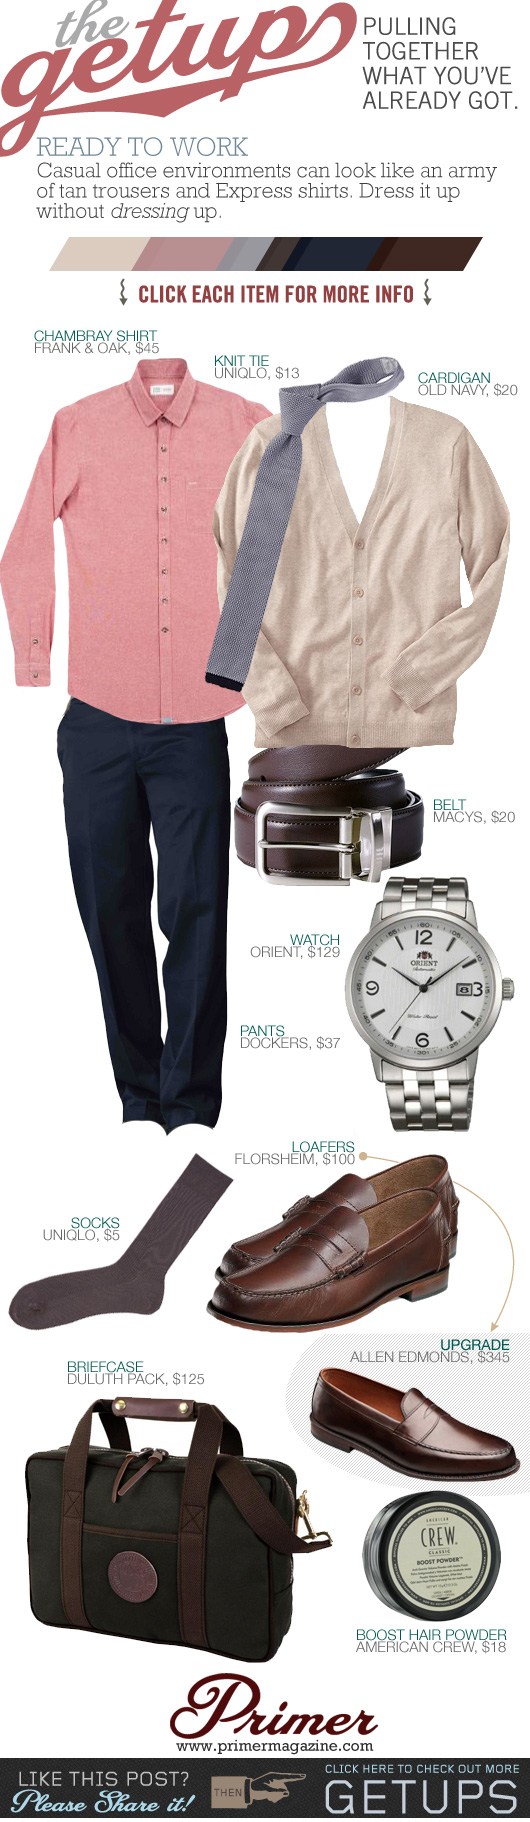 Getup Ready to Work - Tan sweater, pink shirt, blue pants, brown loafers